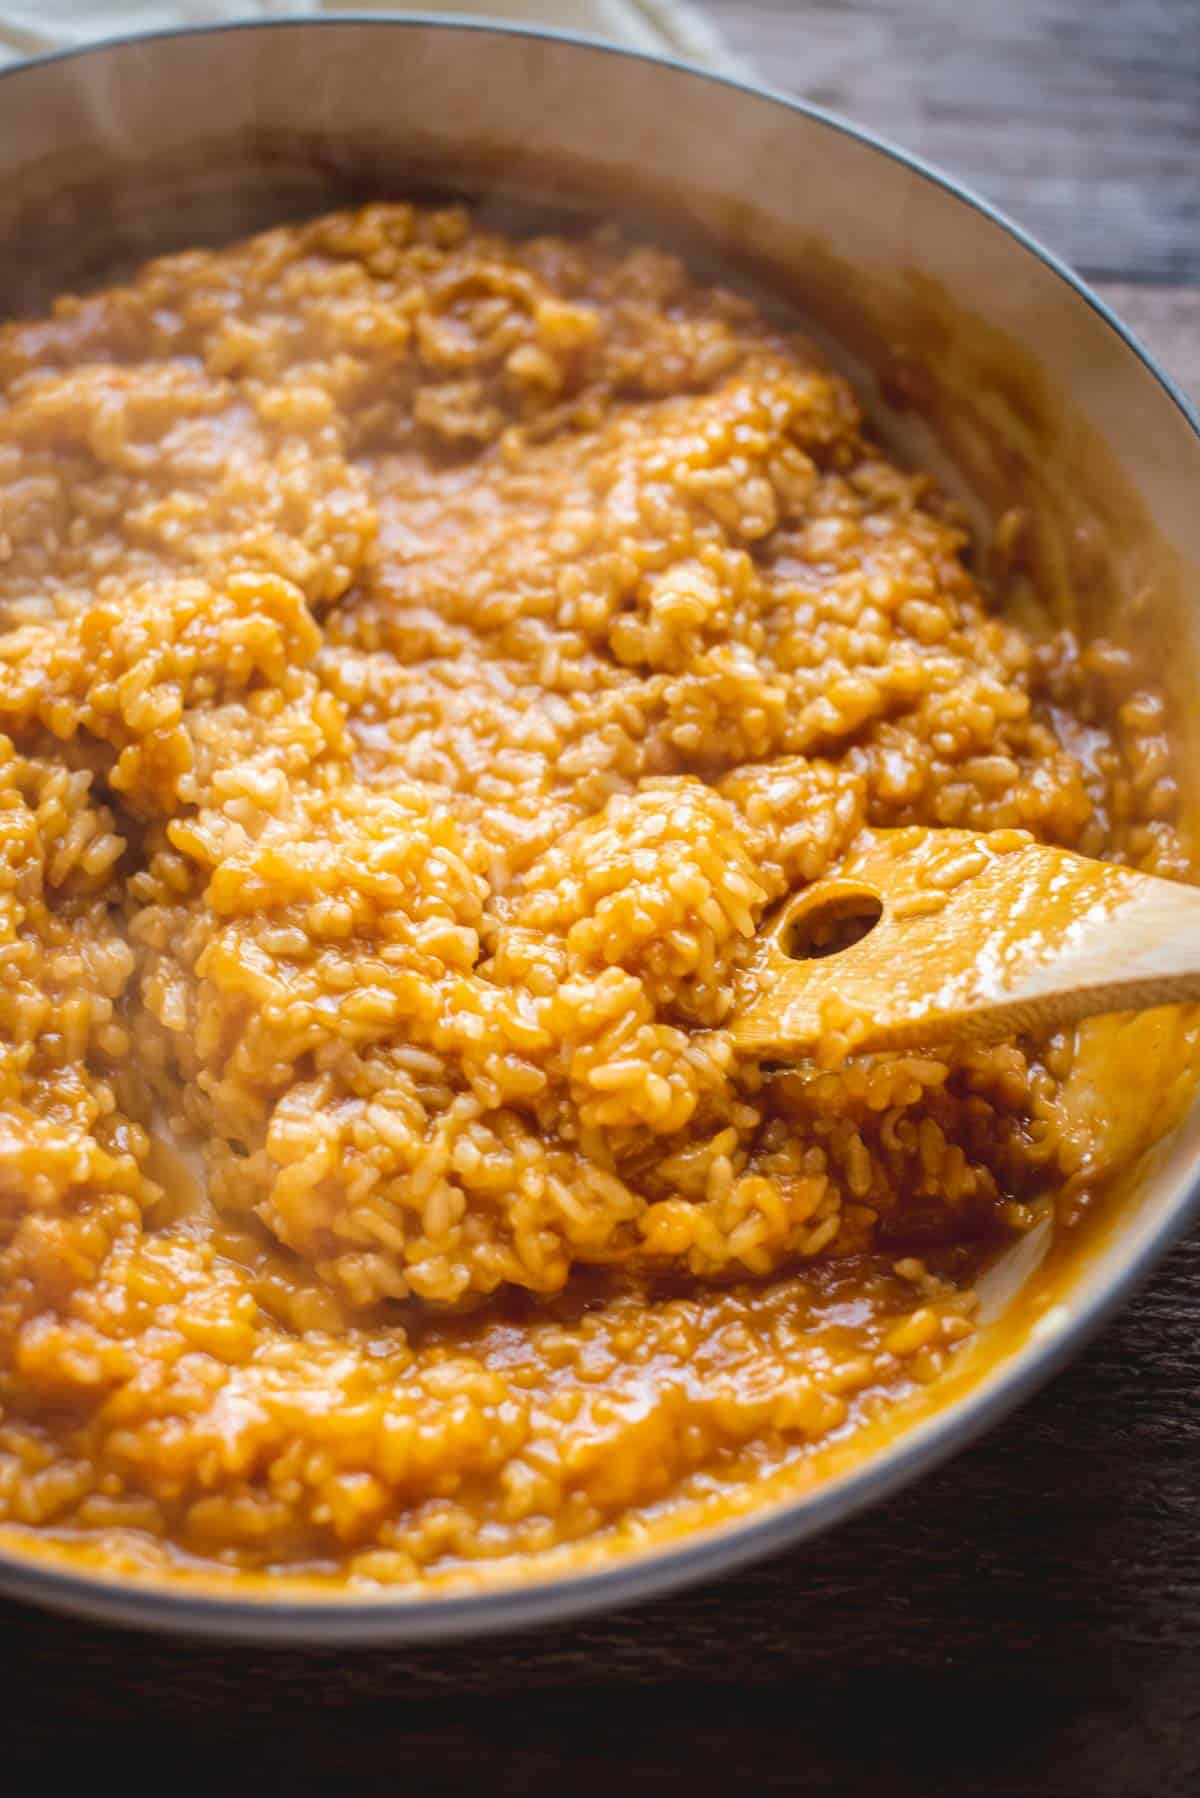 Orange color risotto without too much liquid. A wooden spoon with a hole through it is slowly moving the risotto around the pot.